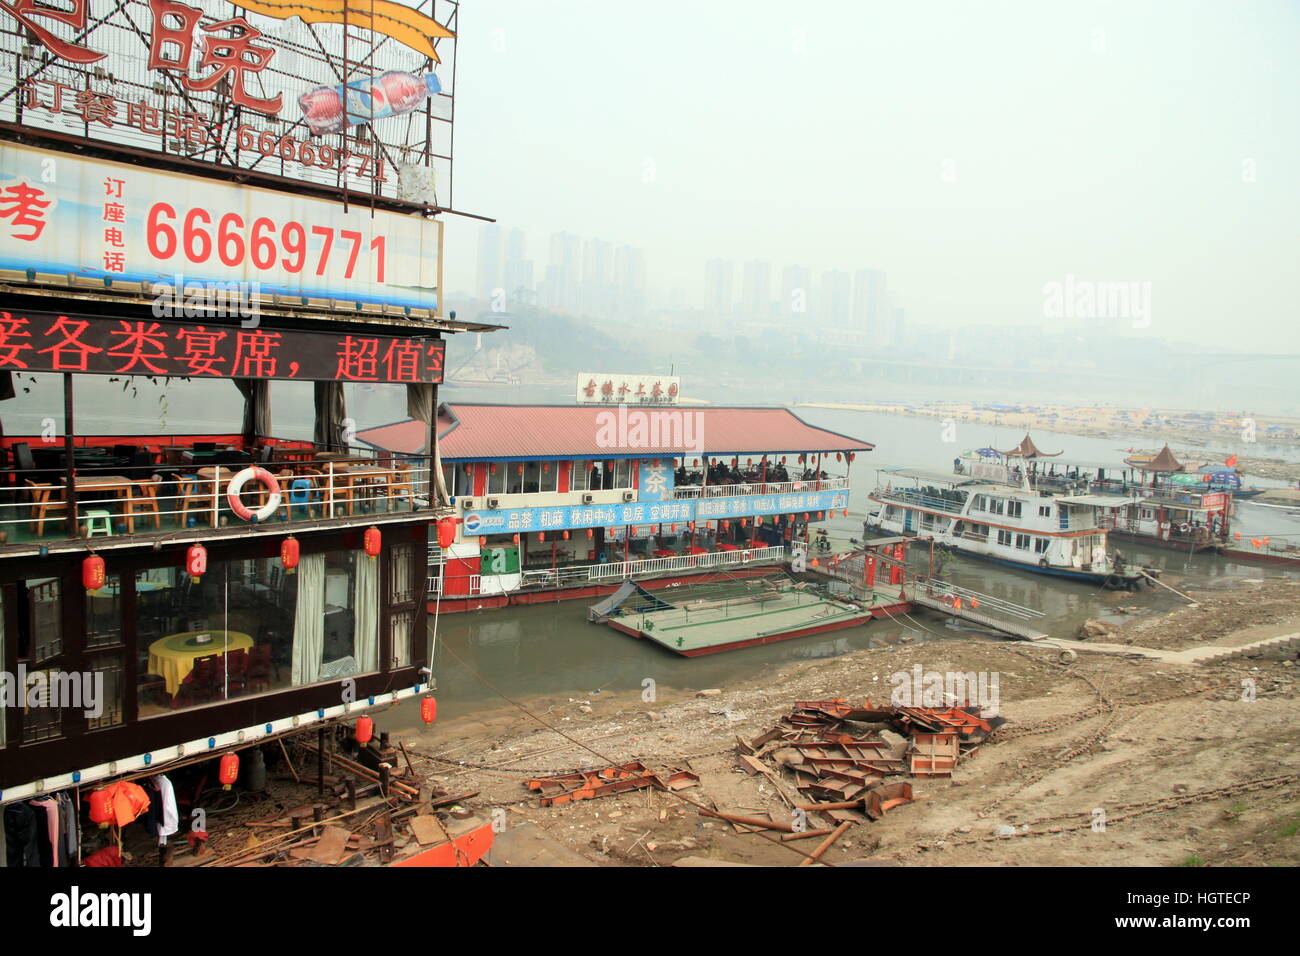 Old boats on the Yangtze River in Chongqing, China Stock Photo